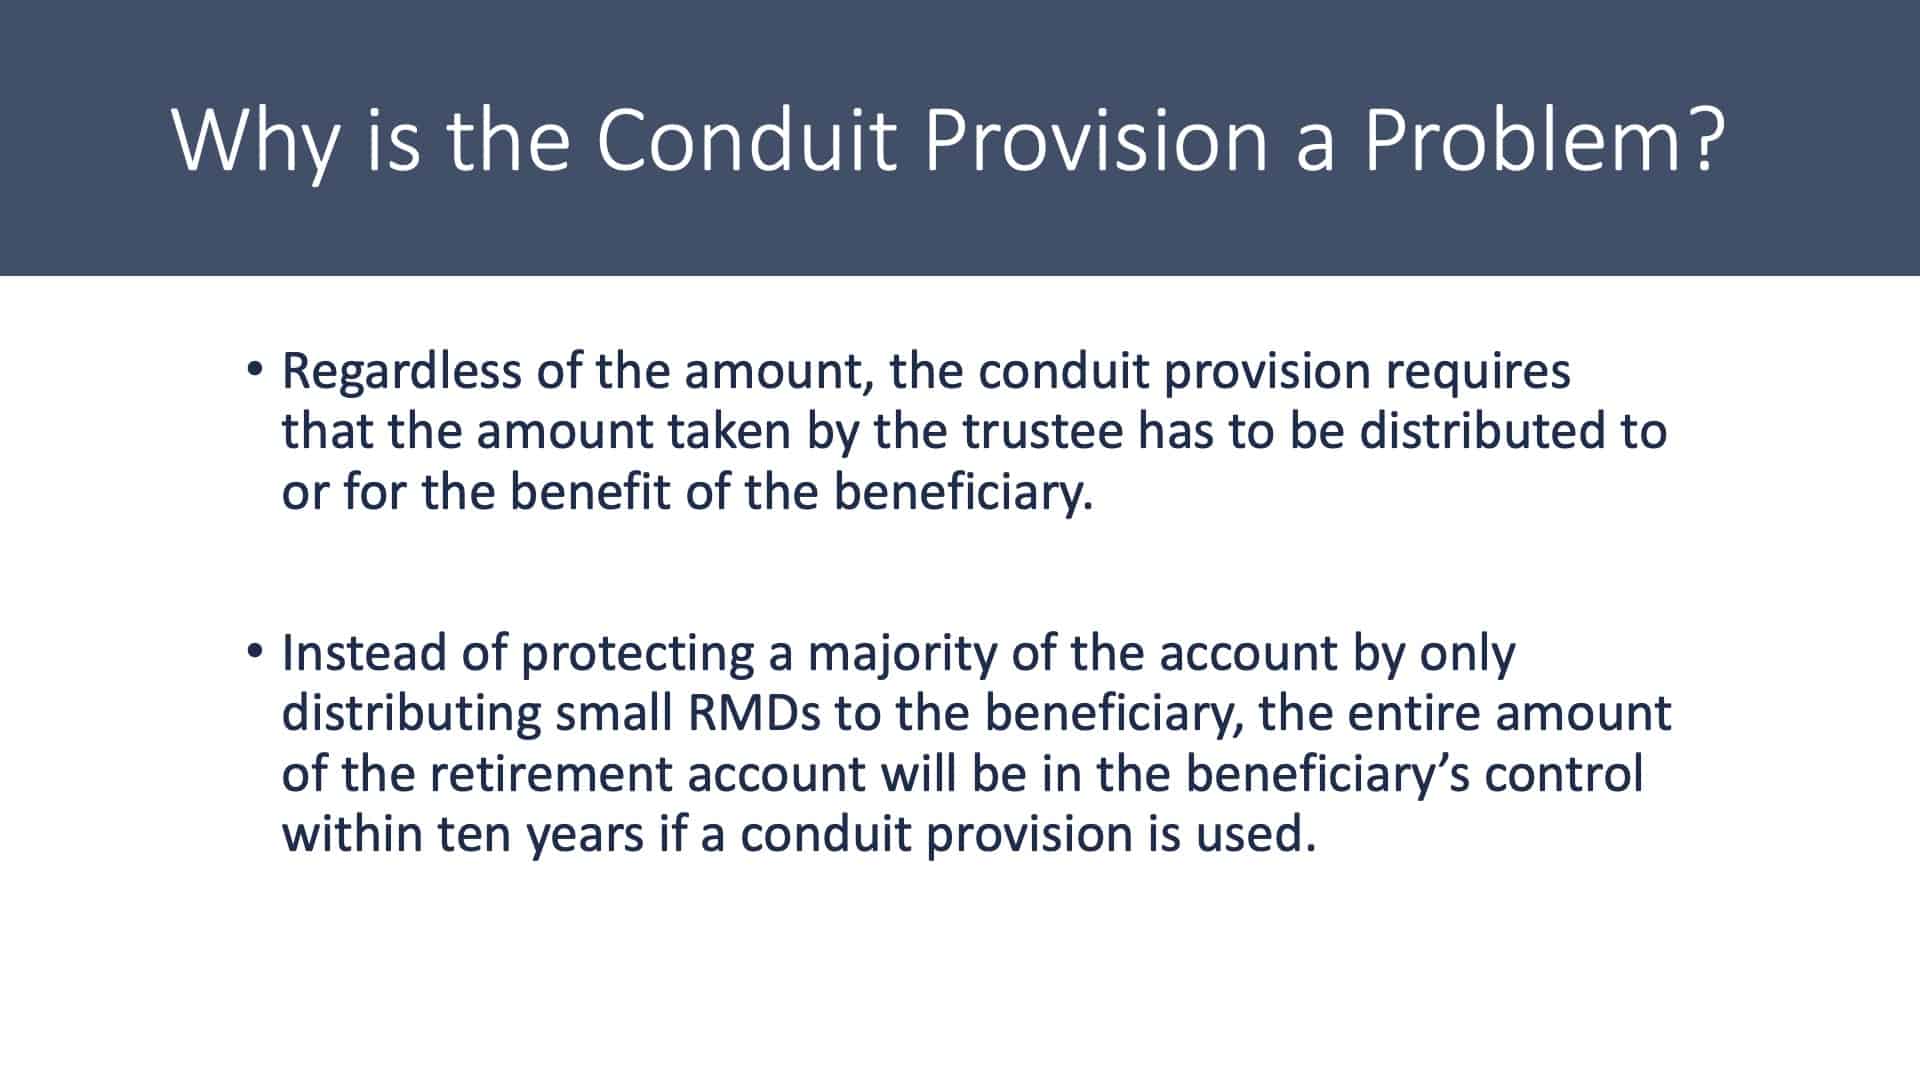 Is a Will Enough? - Why Is the Conduit Provision a Problem?